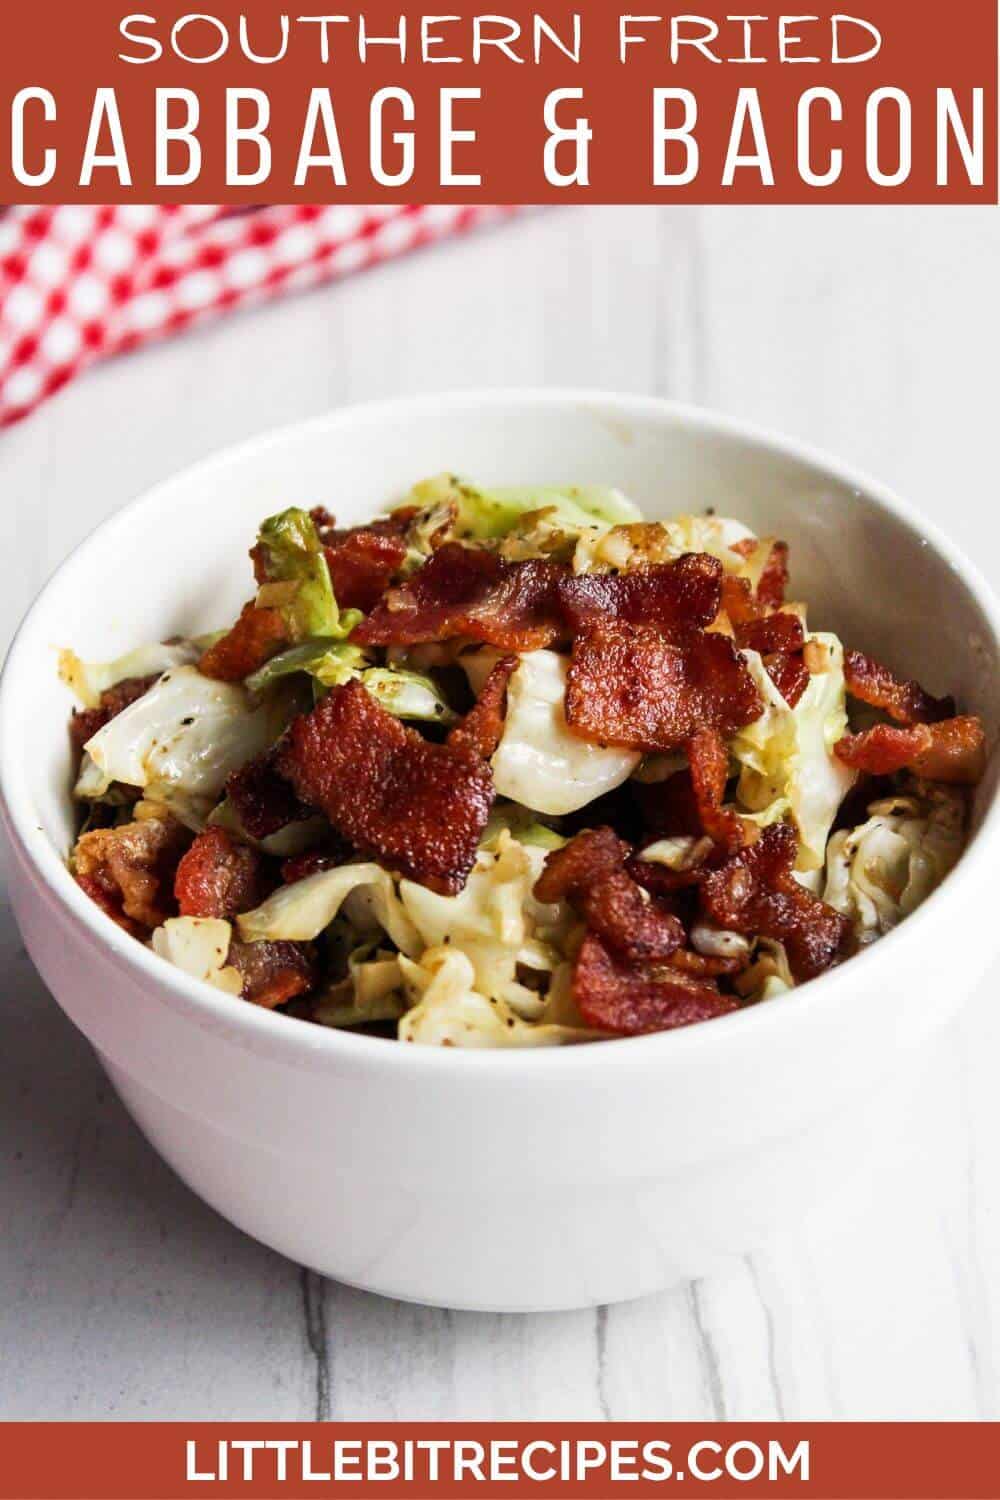 Cabbage and bacon in bowl with text.